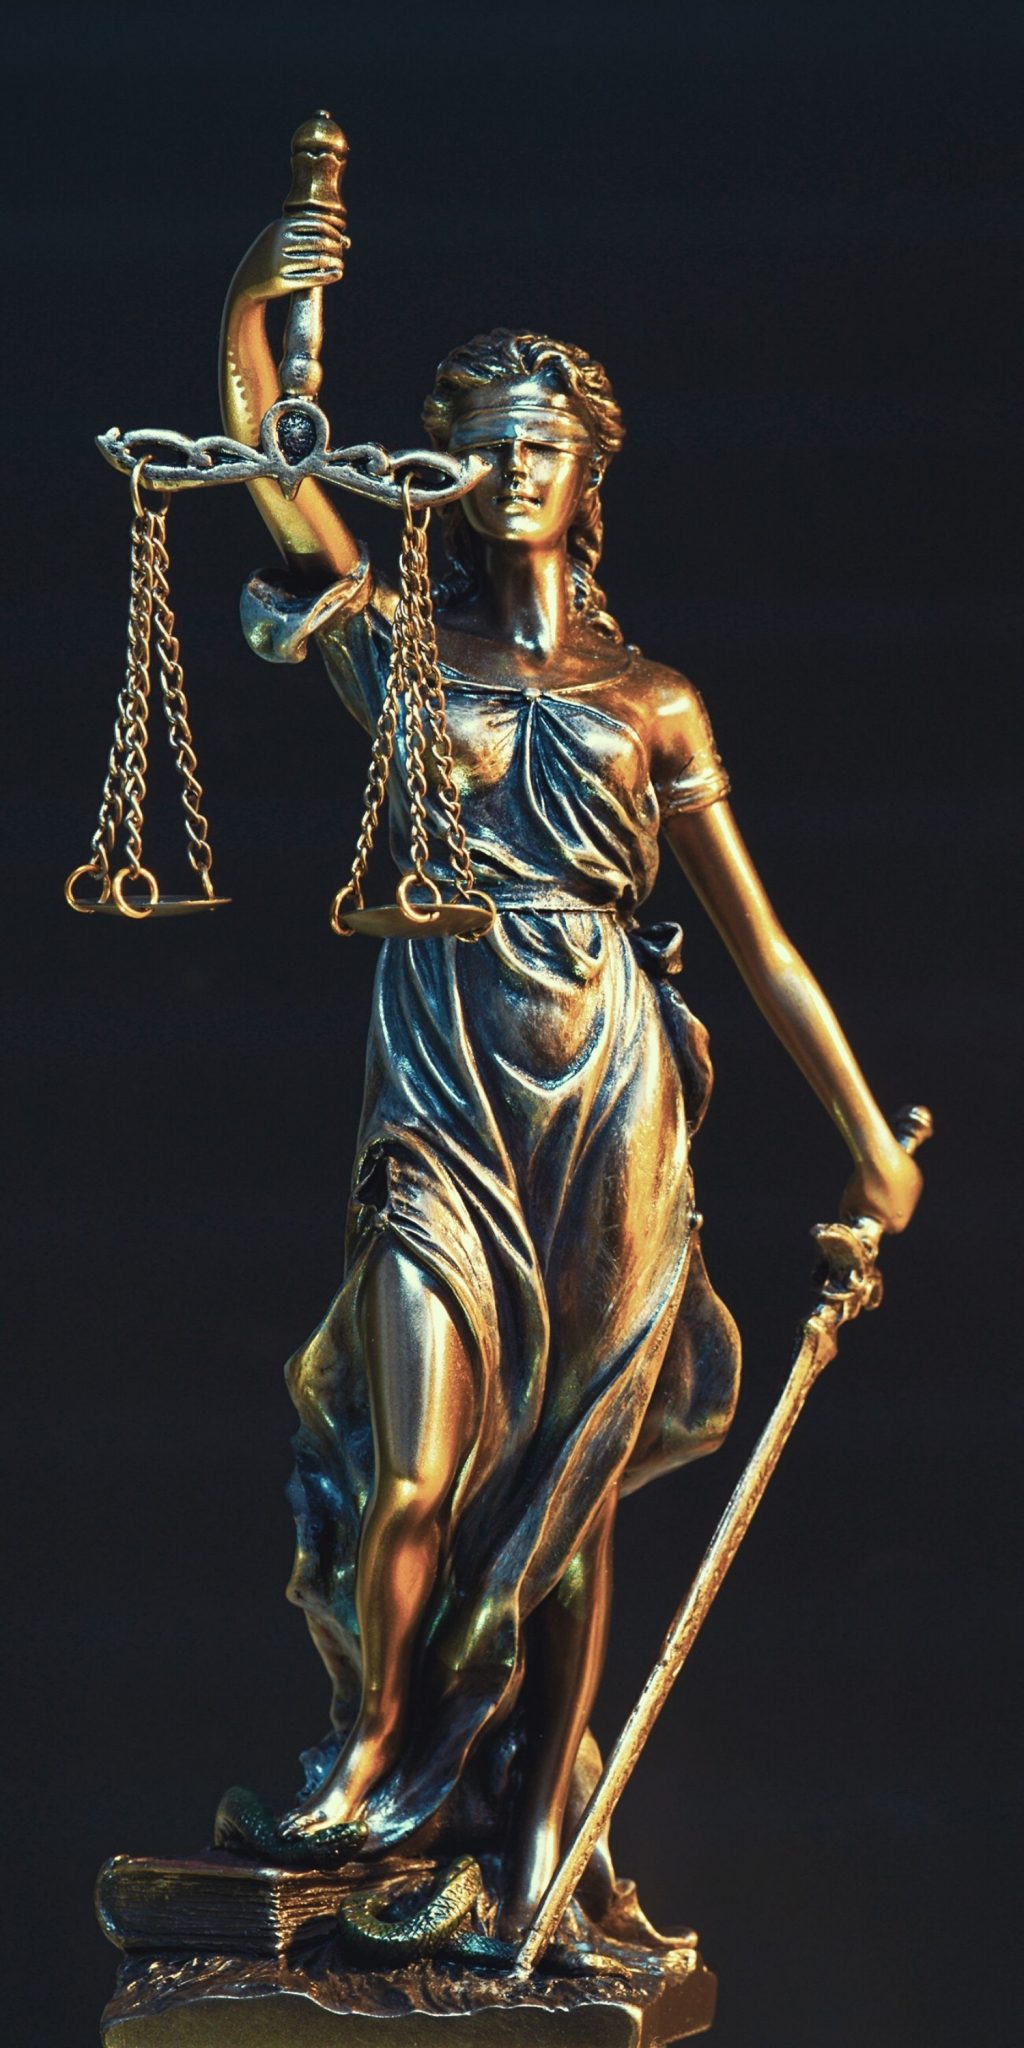 Gold statuette of Lady Justice